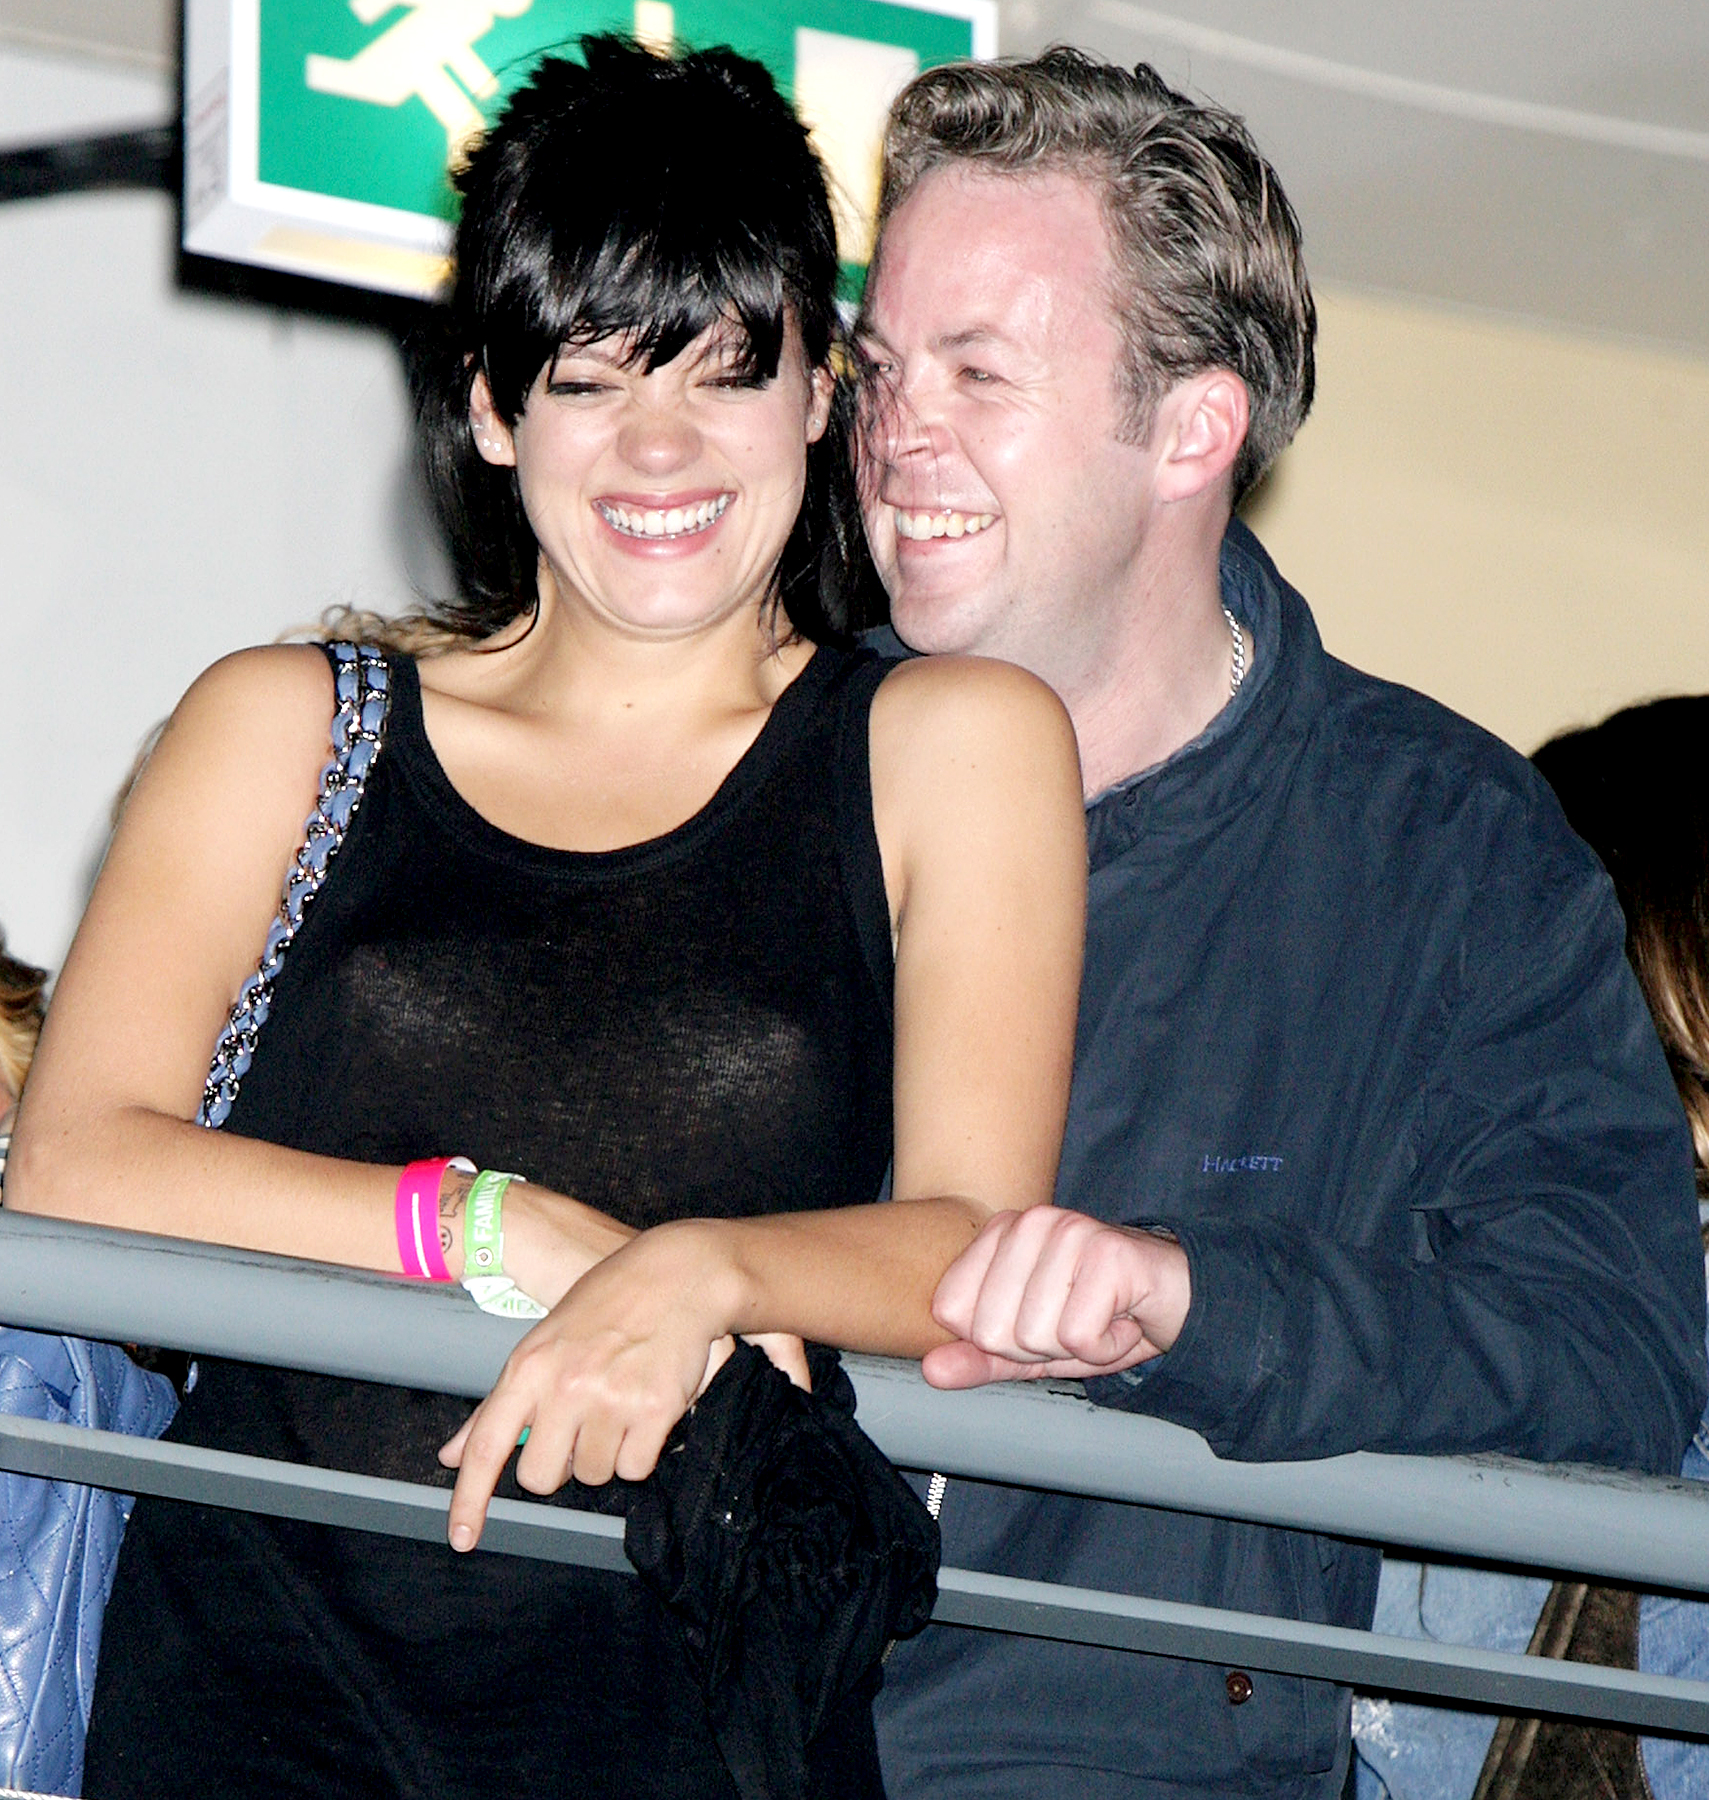 Lily Allen I Slept With Female Escorts While Married to Sam Cooper pic photo